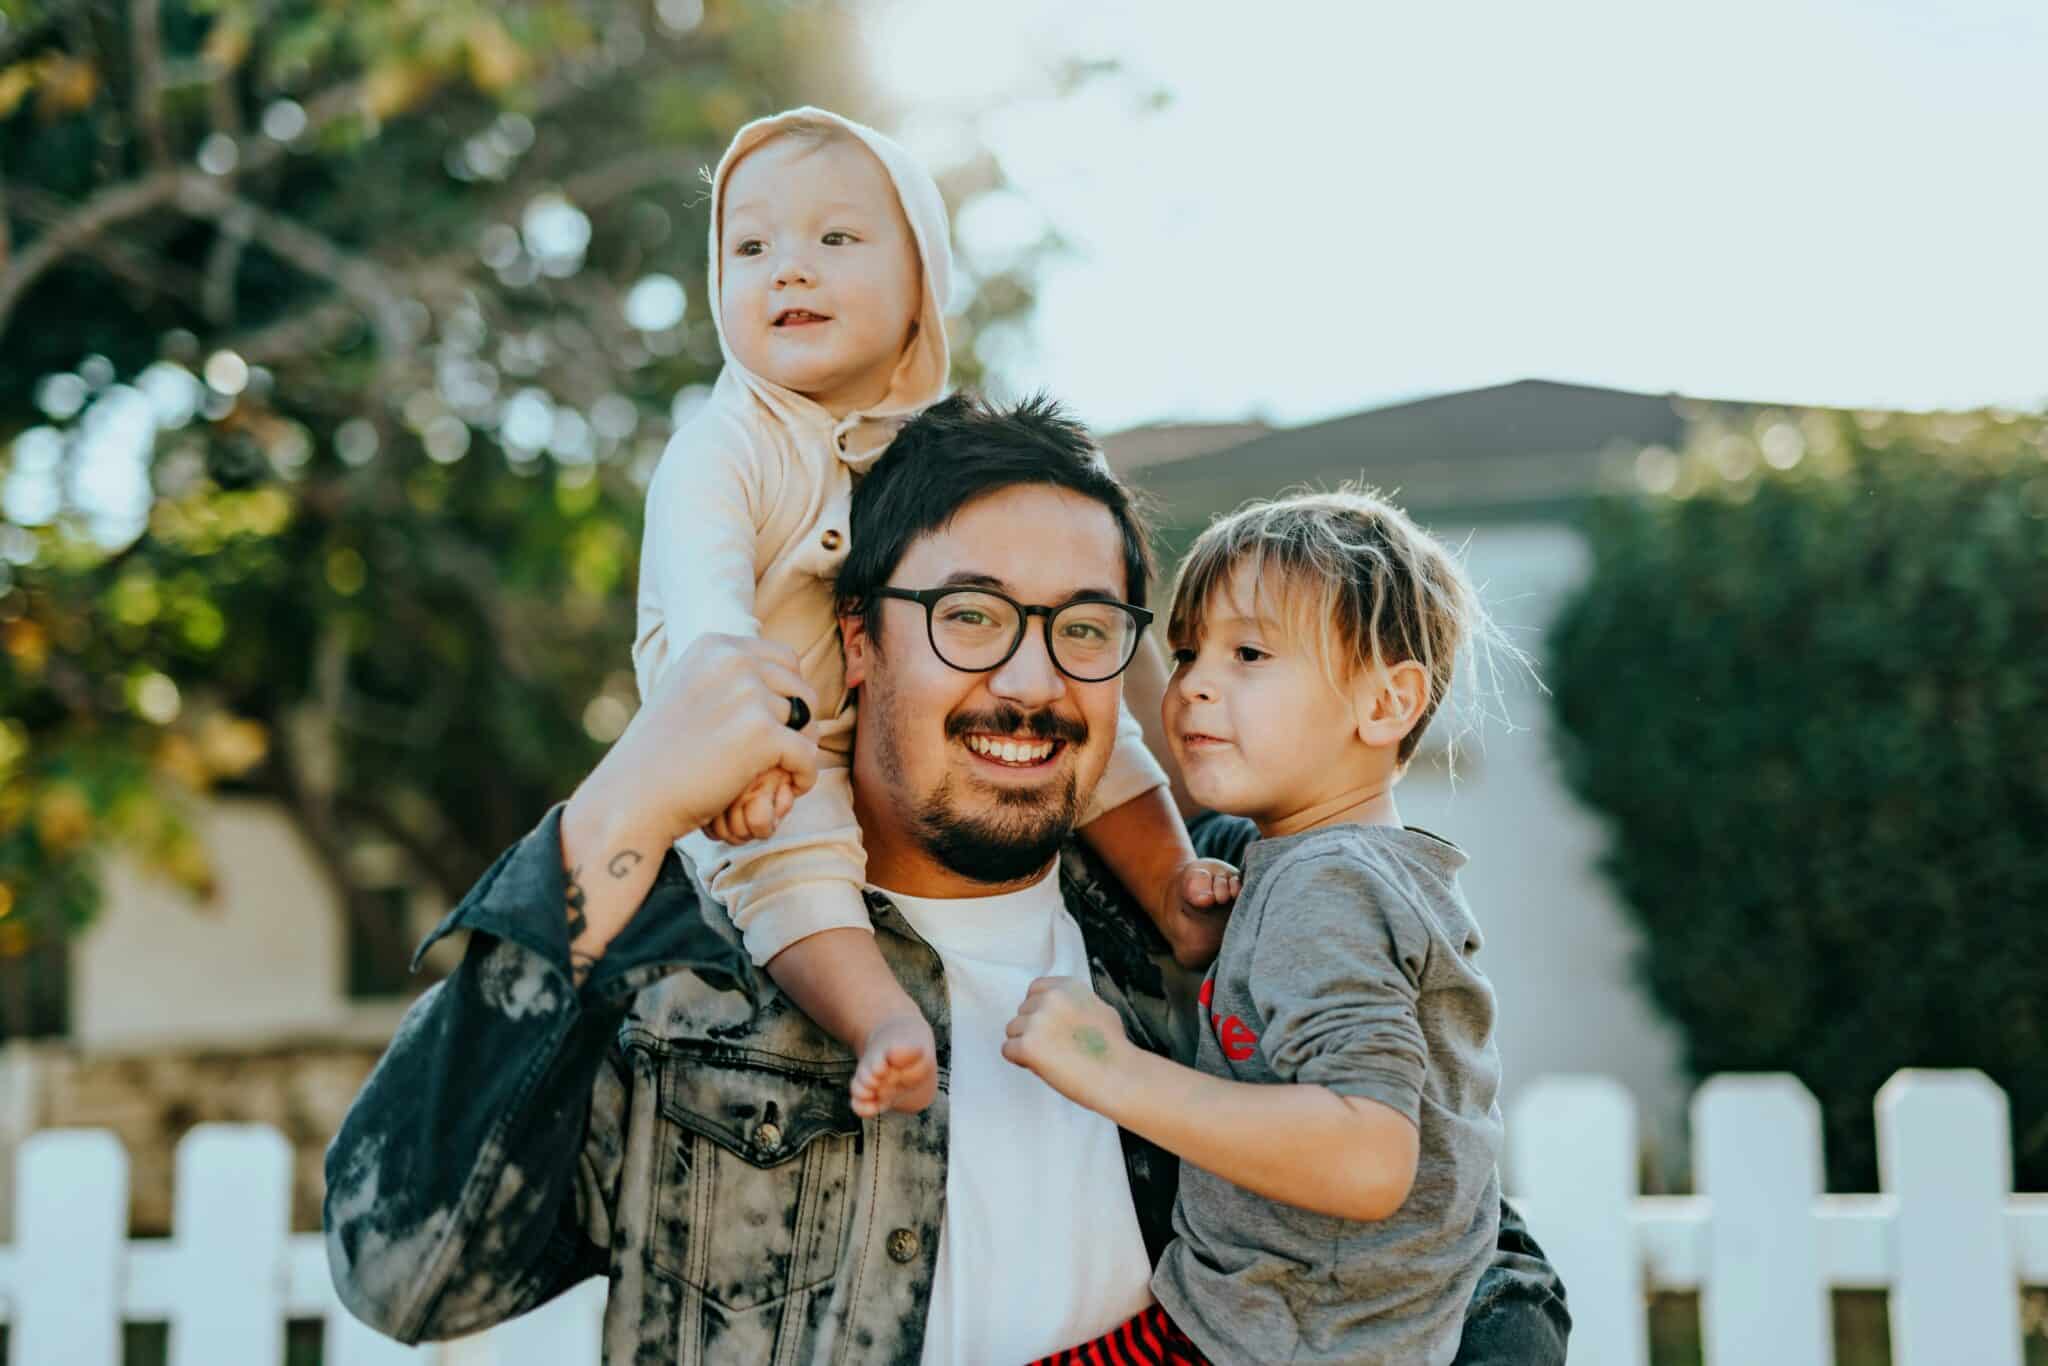 father and kids | xPhoto by Nathan Dumlao on Unsplash